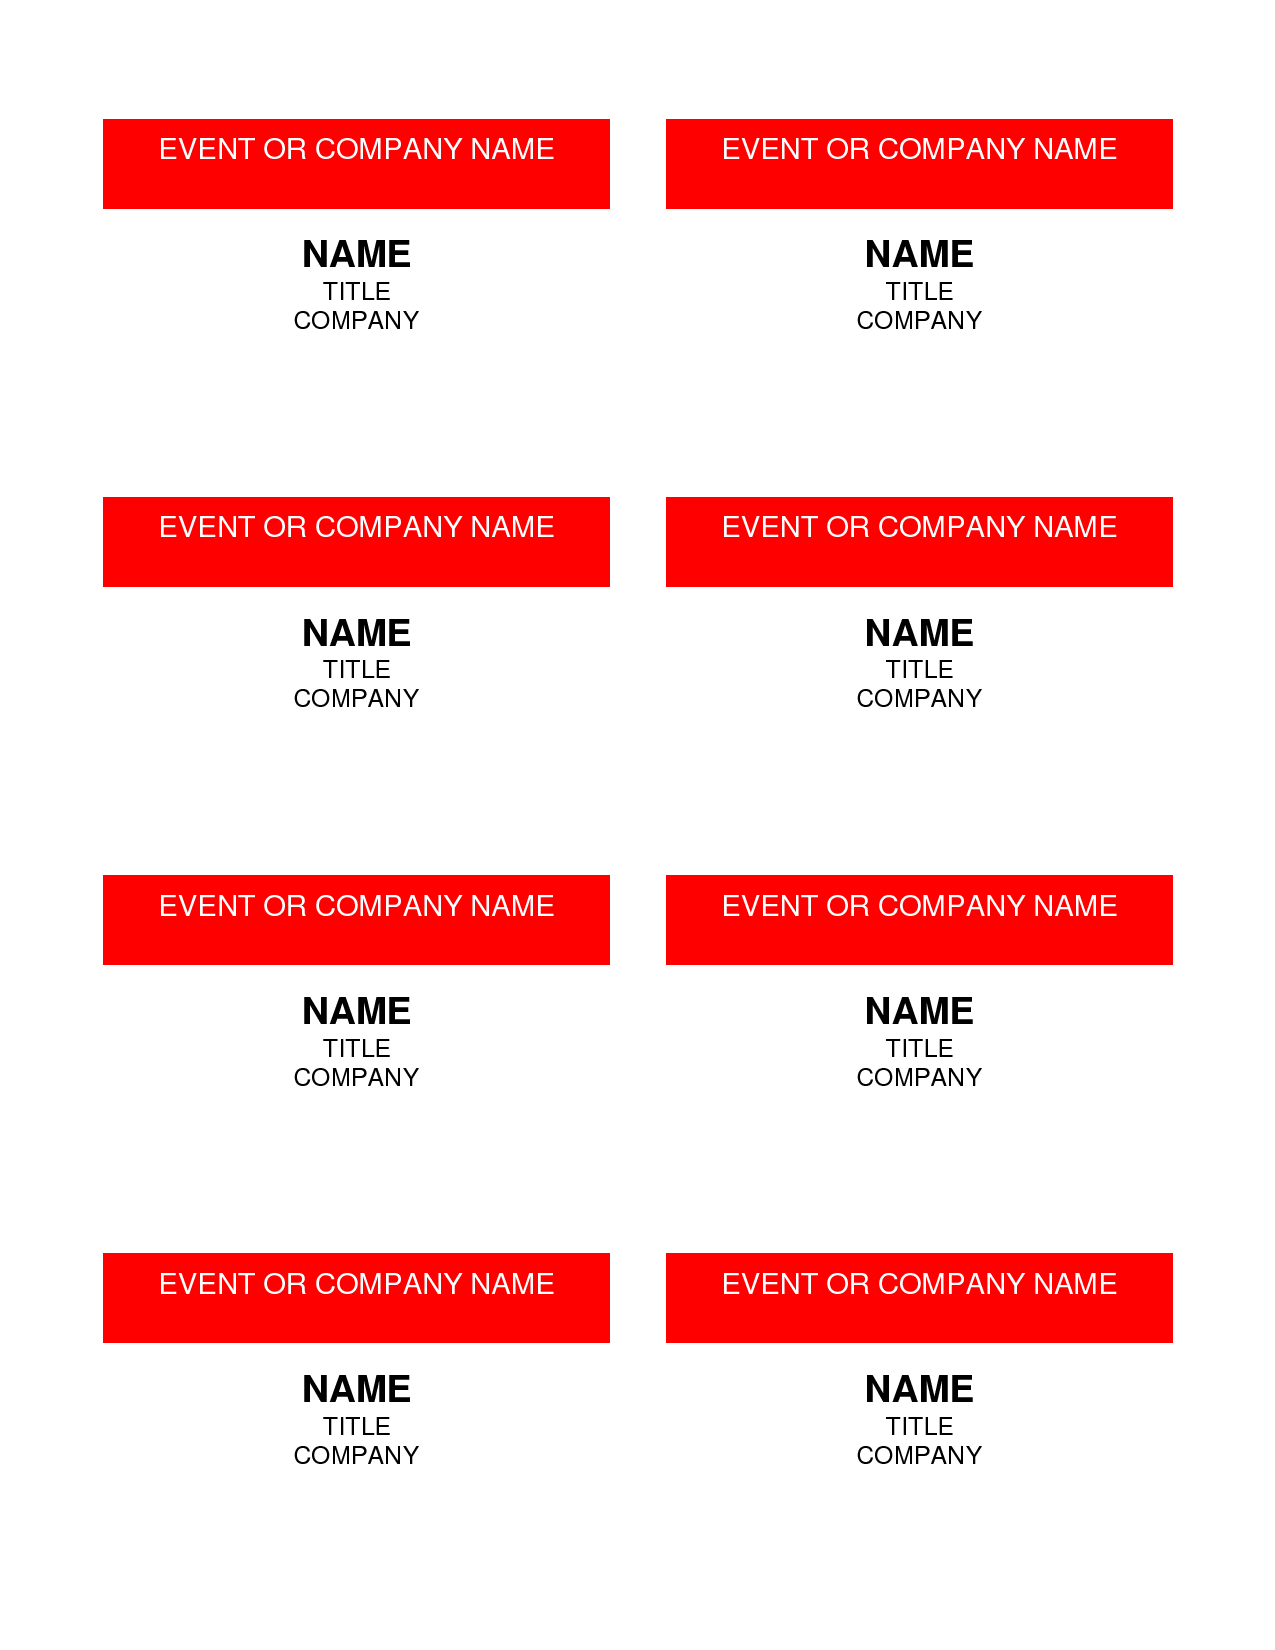 013 Name Badge Template Free 453122 Word Unbelievable Ideas Throughout Name Tag Template Word 2010